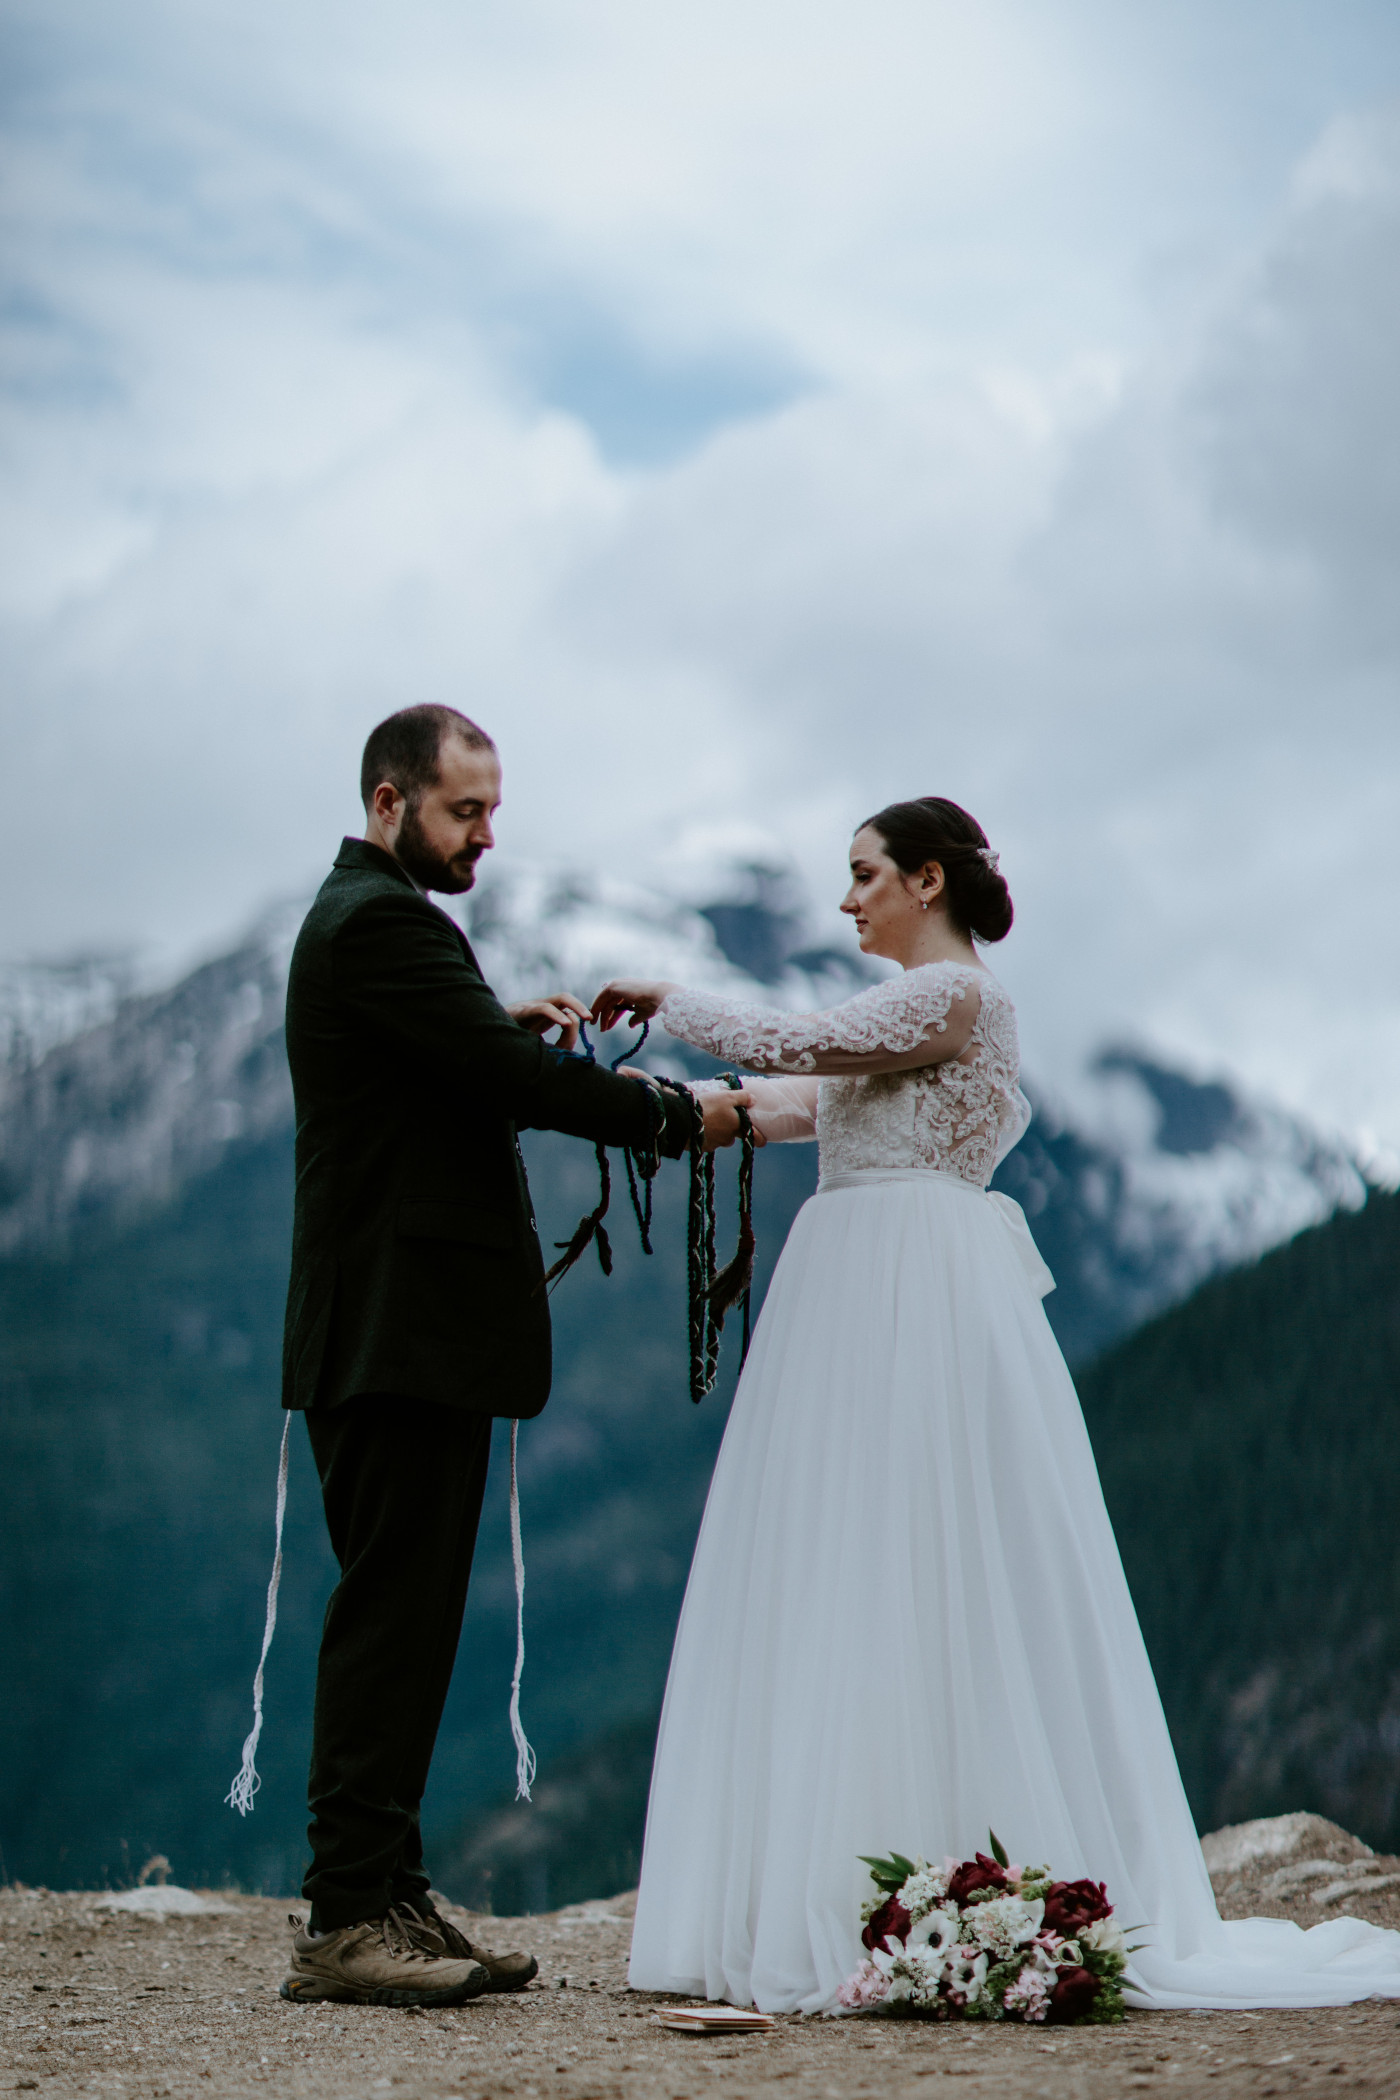 Alex and Elizabeth performing the rope tying ceremony. Elopement photography at North Cascades National Park by Sienna Plus Josh.